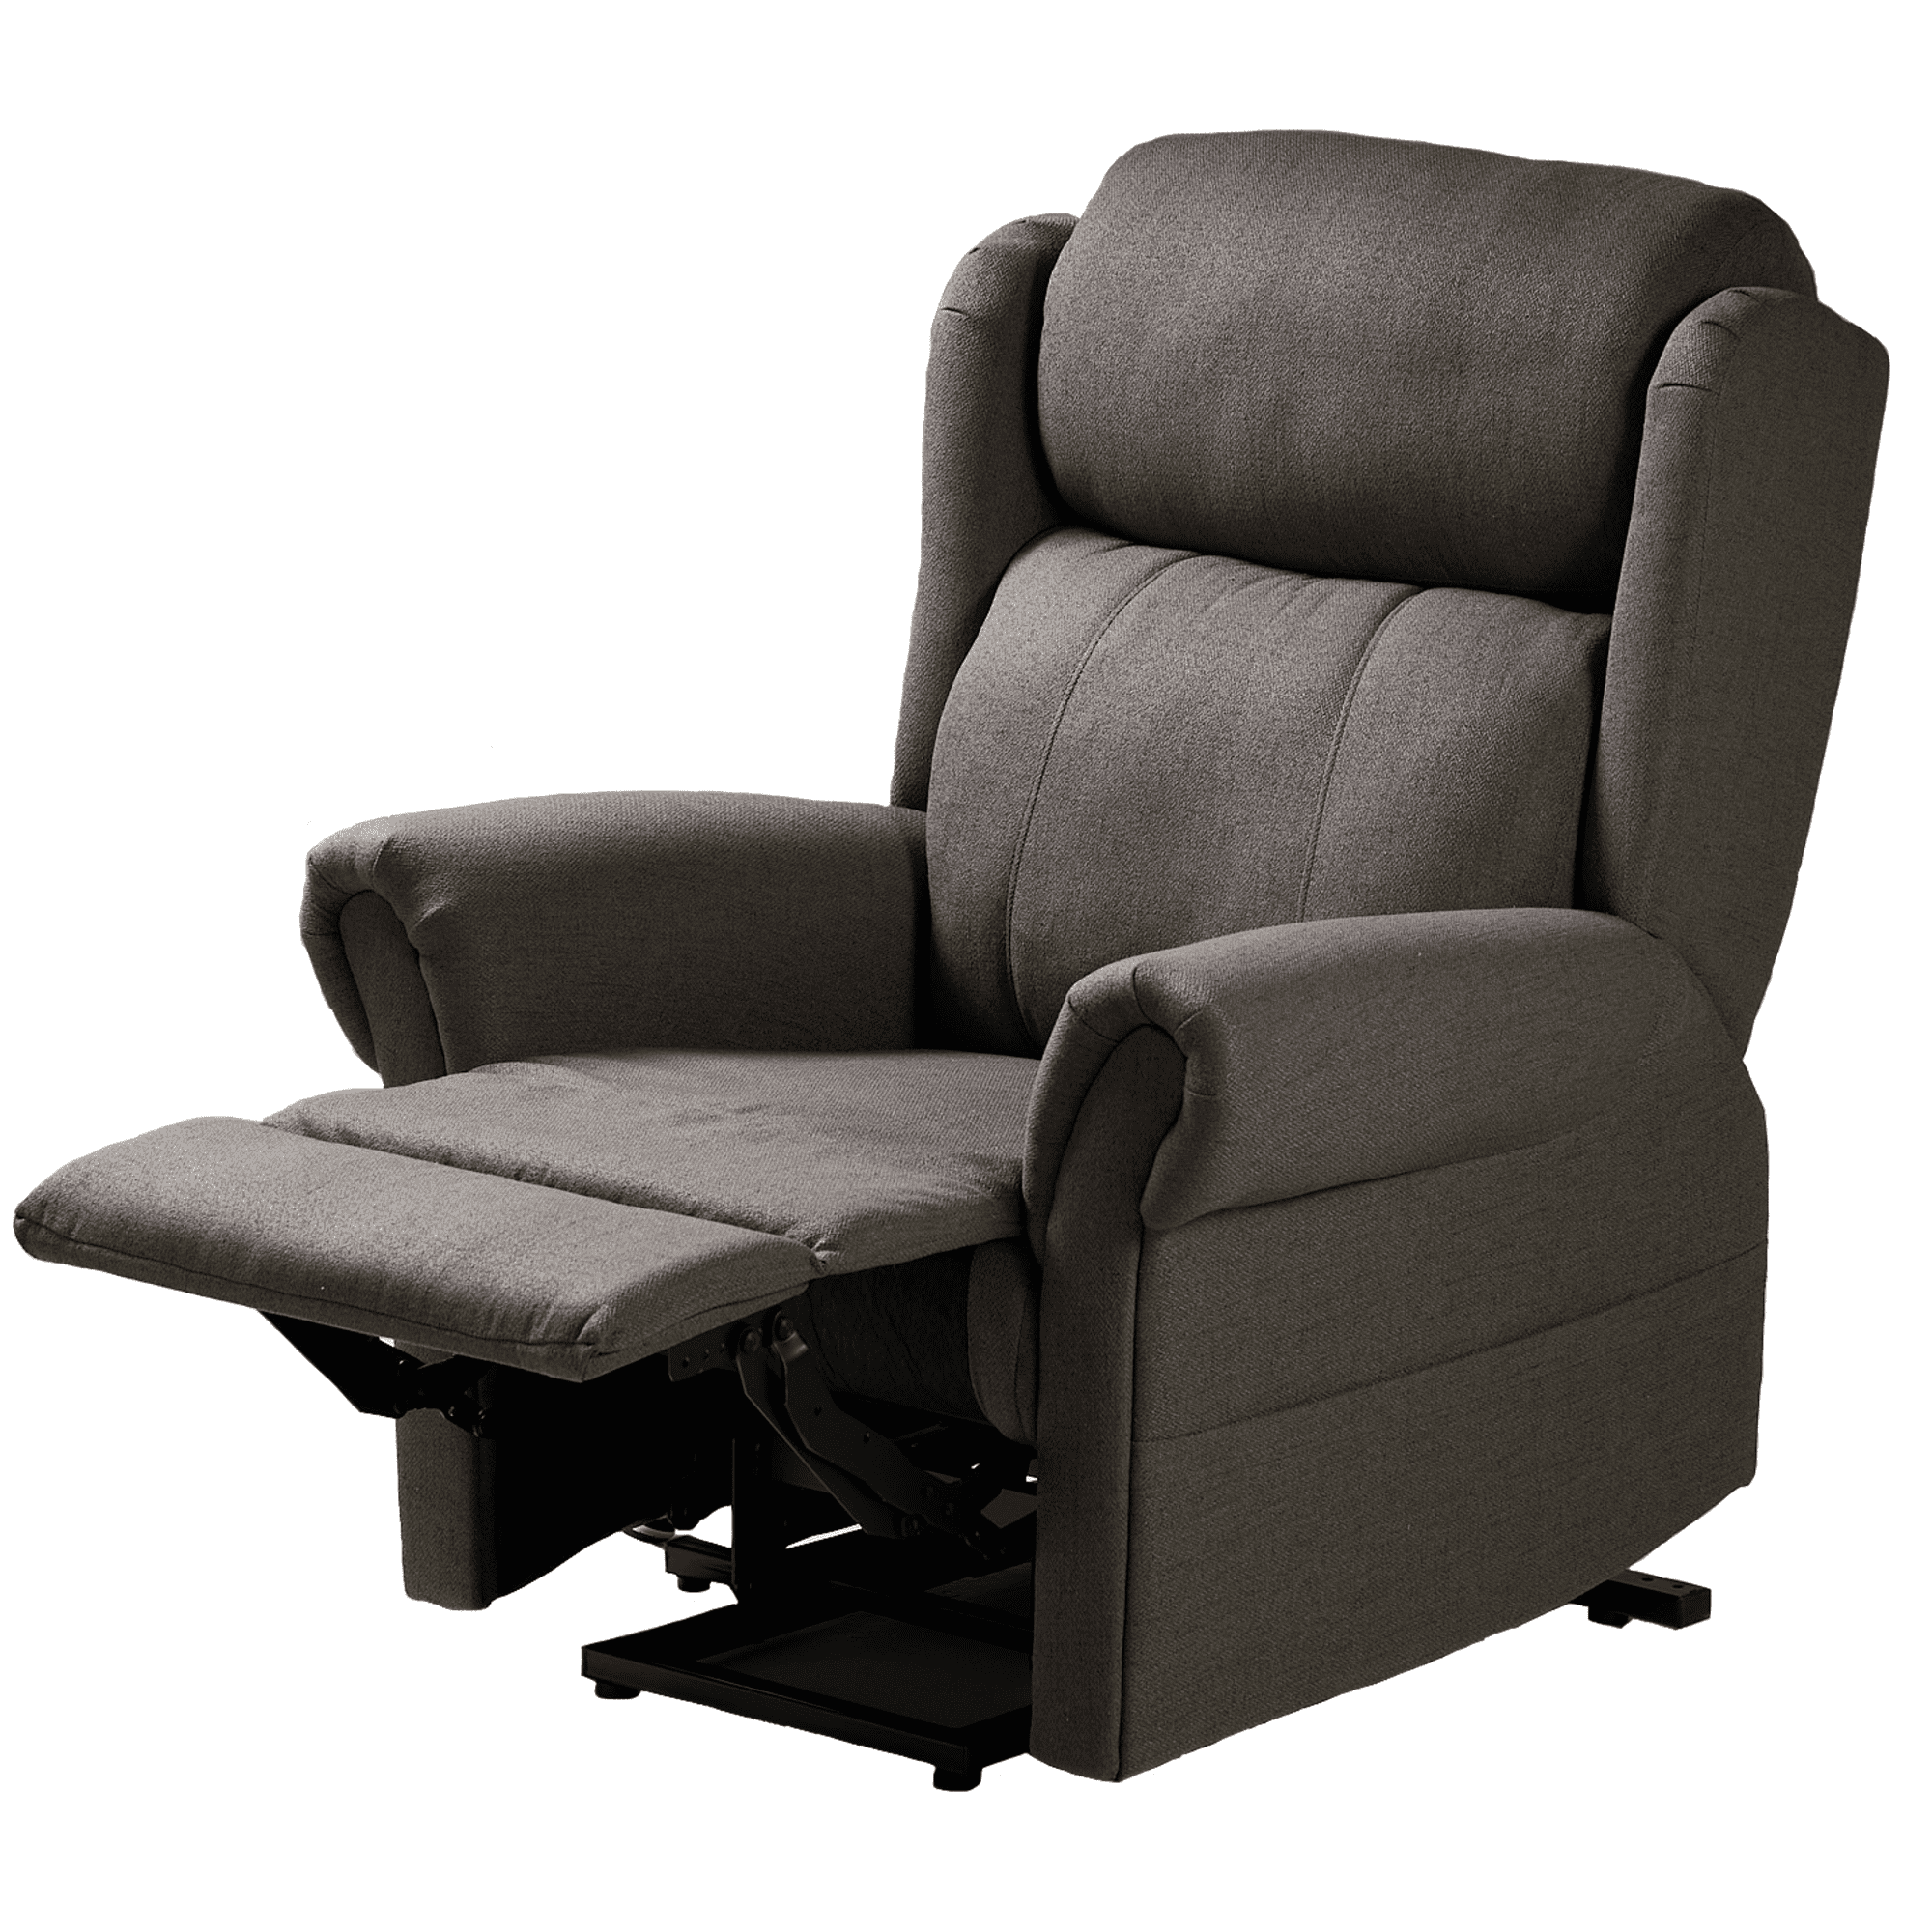 SonderCare Essence Lift Chair Product Page Relax Position Featured (1)